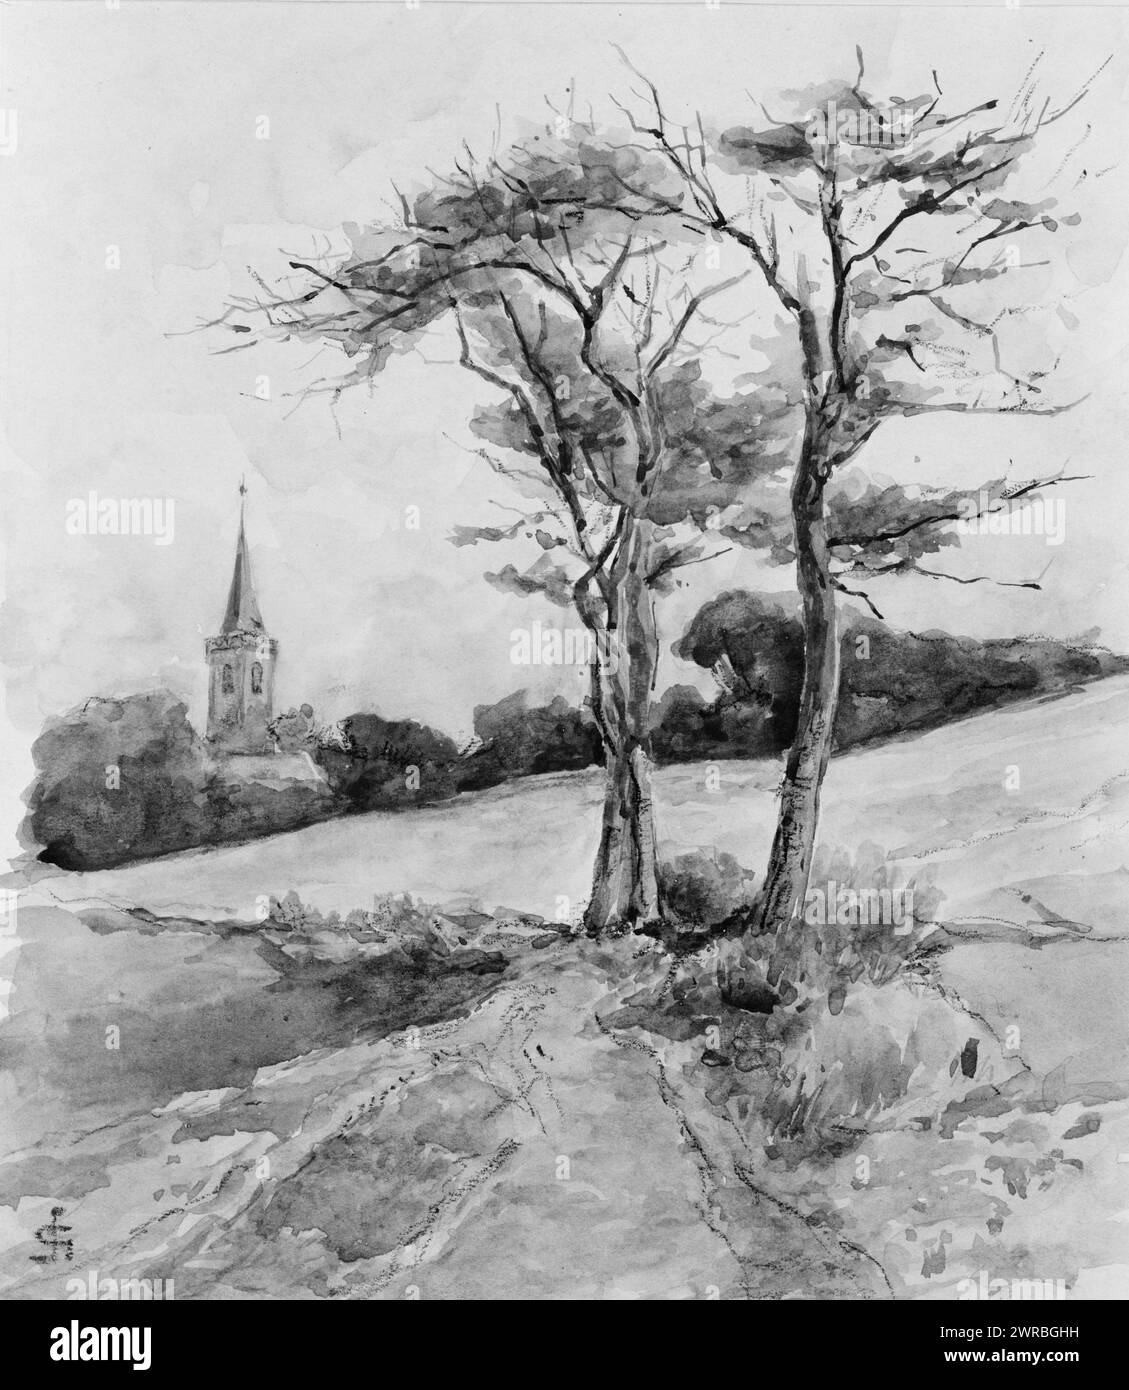 Church tower, Katwyk, Landscape with church tower in distance., Storm van 's-Gravesande, Carel Nicolaas, 1841-1924, artist, between 1860 and 1915, Landscape drawings, 1860-1920., Landscape drawings, 1860-1920, Watercolors, 1860-1920, 1 drawing: watercolor, 24 x 21 cm Stock Photo